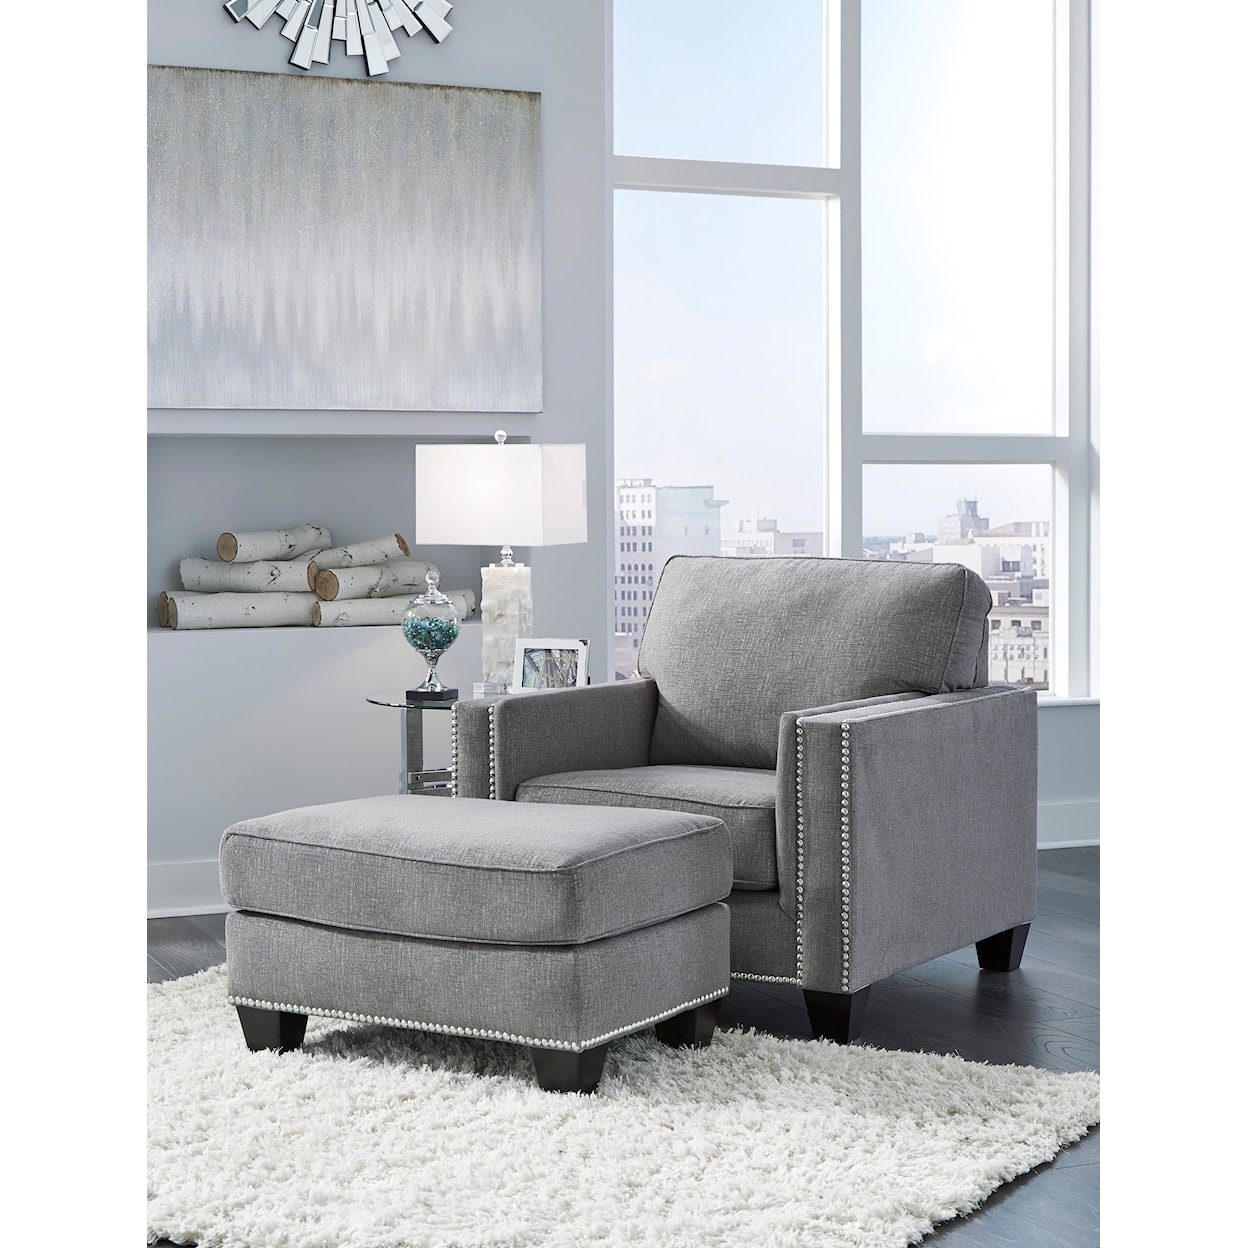 StyleLine Barrali Chair and Ottoman